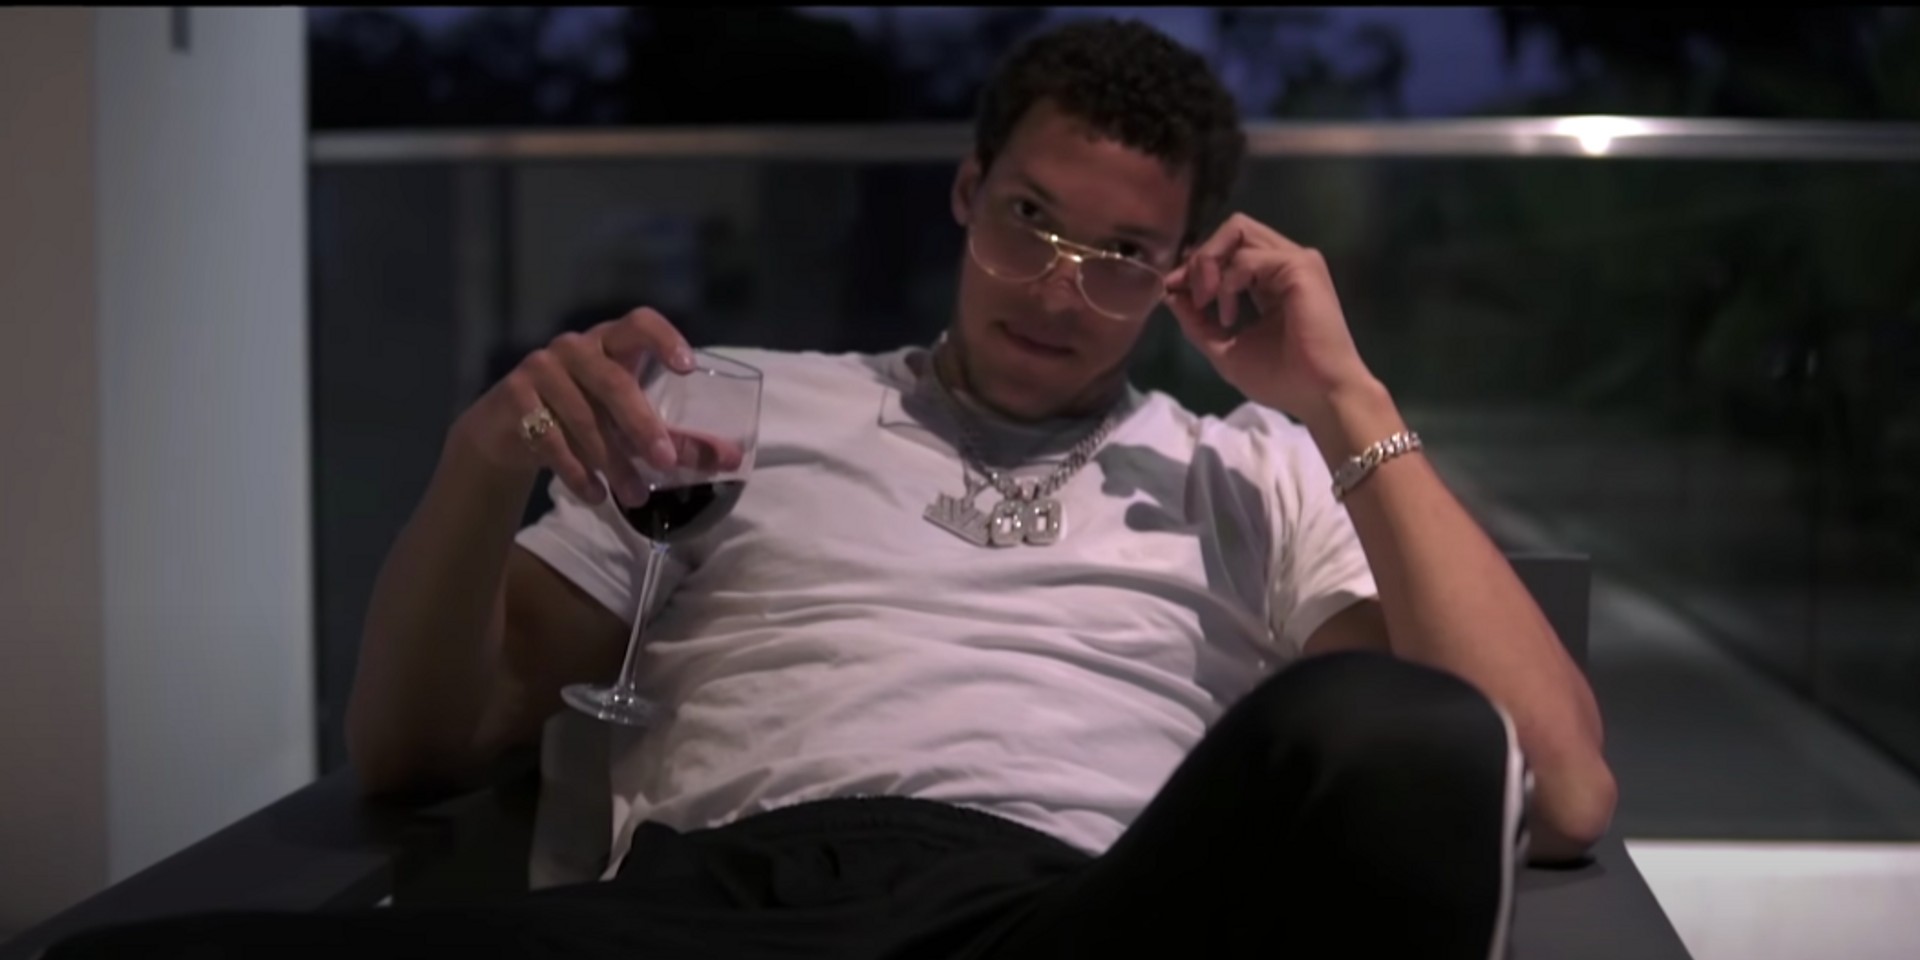 NBA player Aaron Gordon pursues his rap career off the courts with new track '9 OUT OF 10' – watch